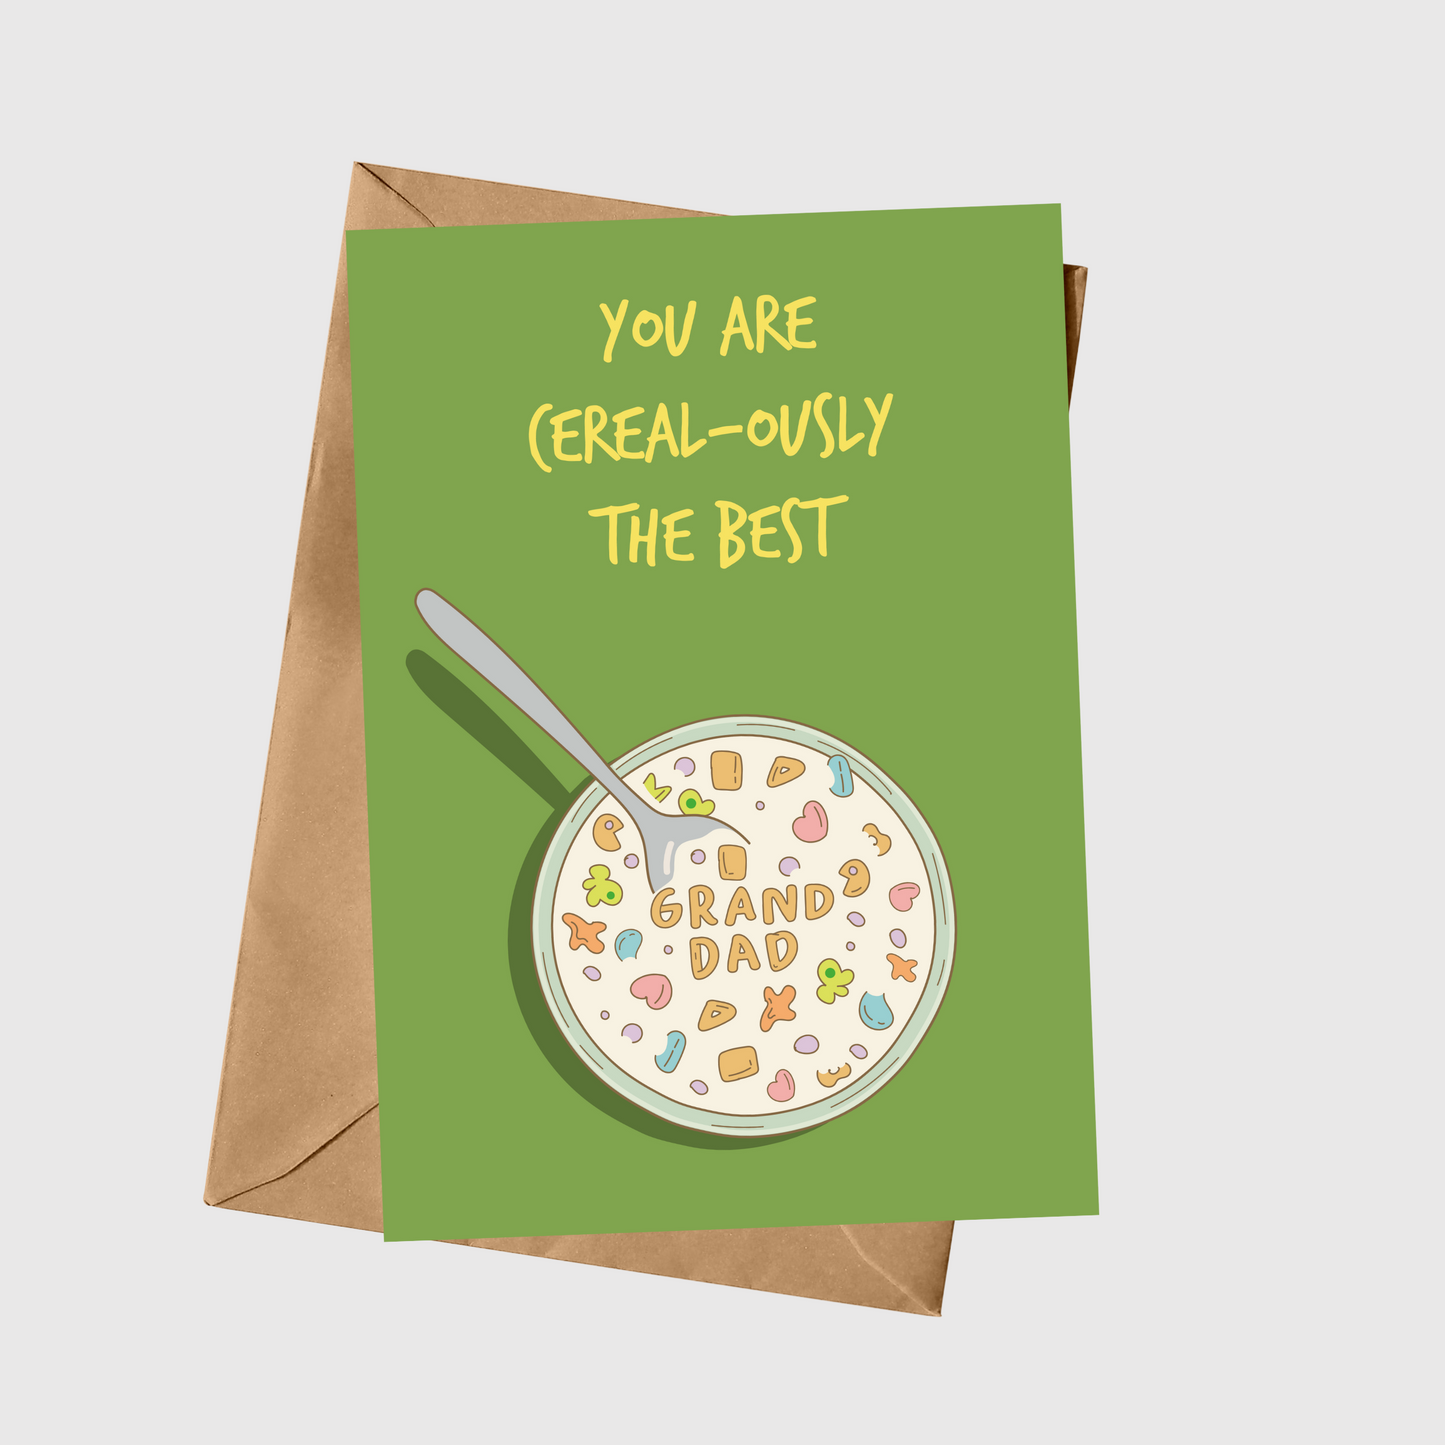 You Are Cereal-ously The Best Grandad